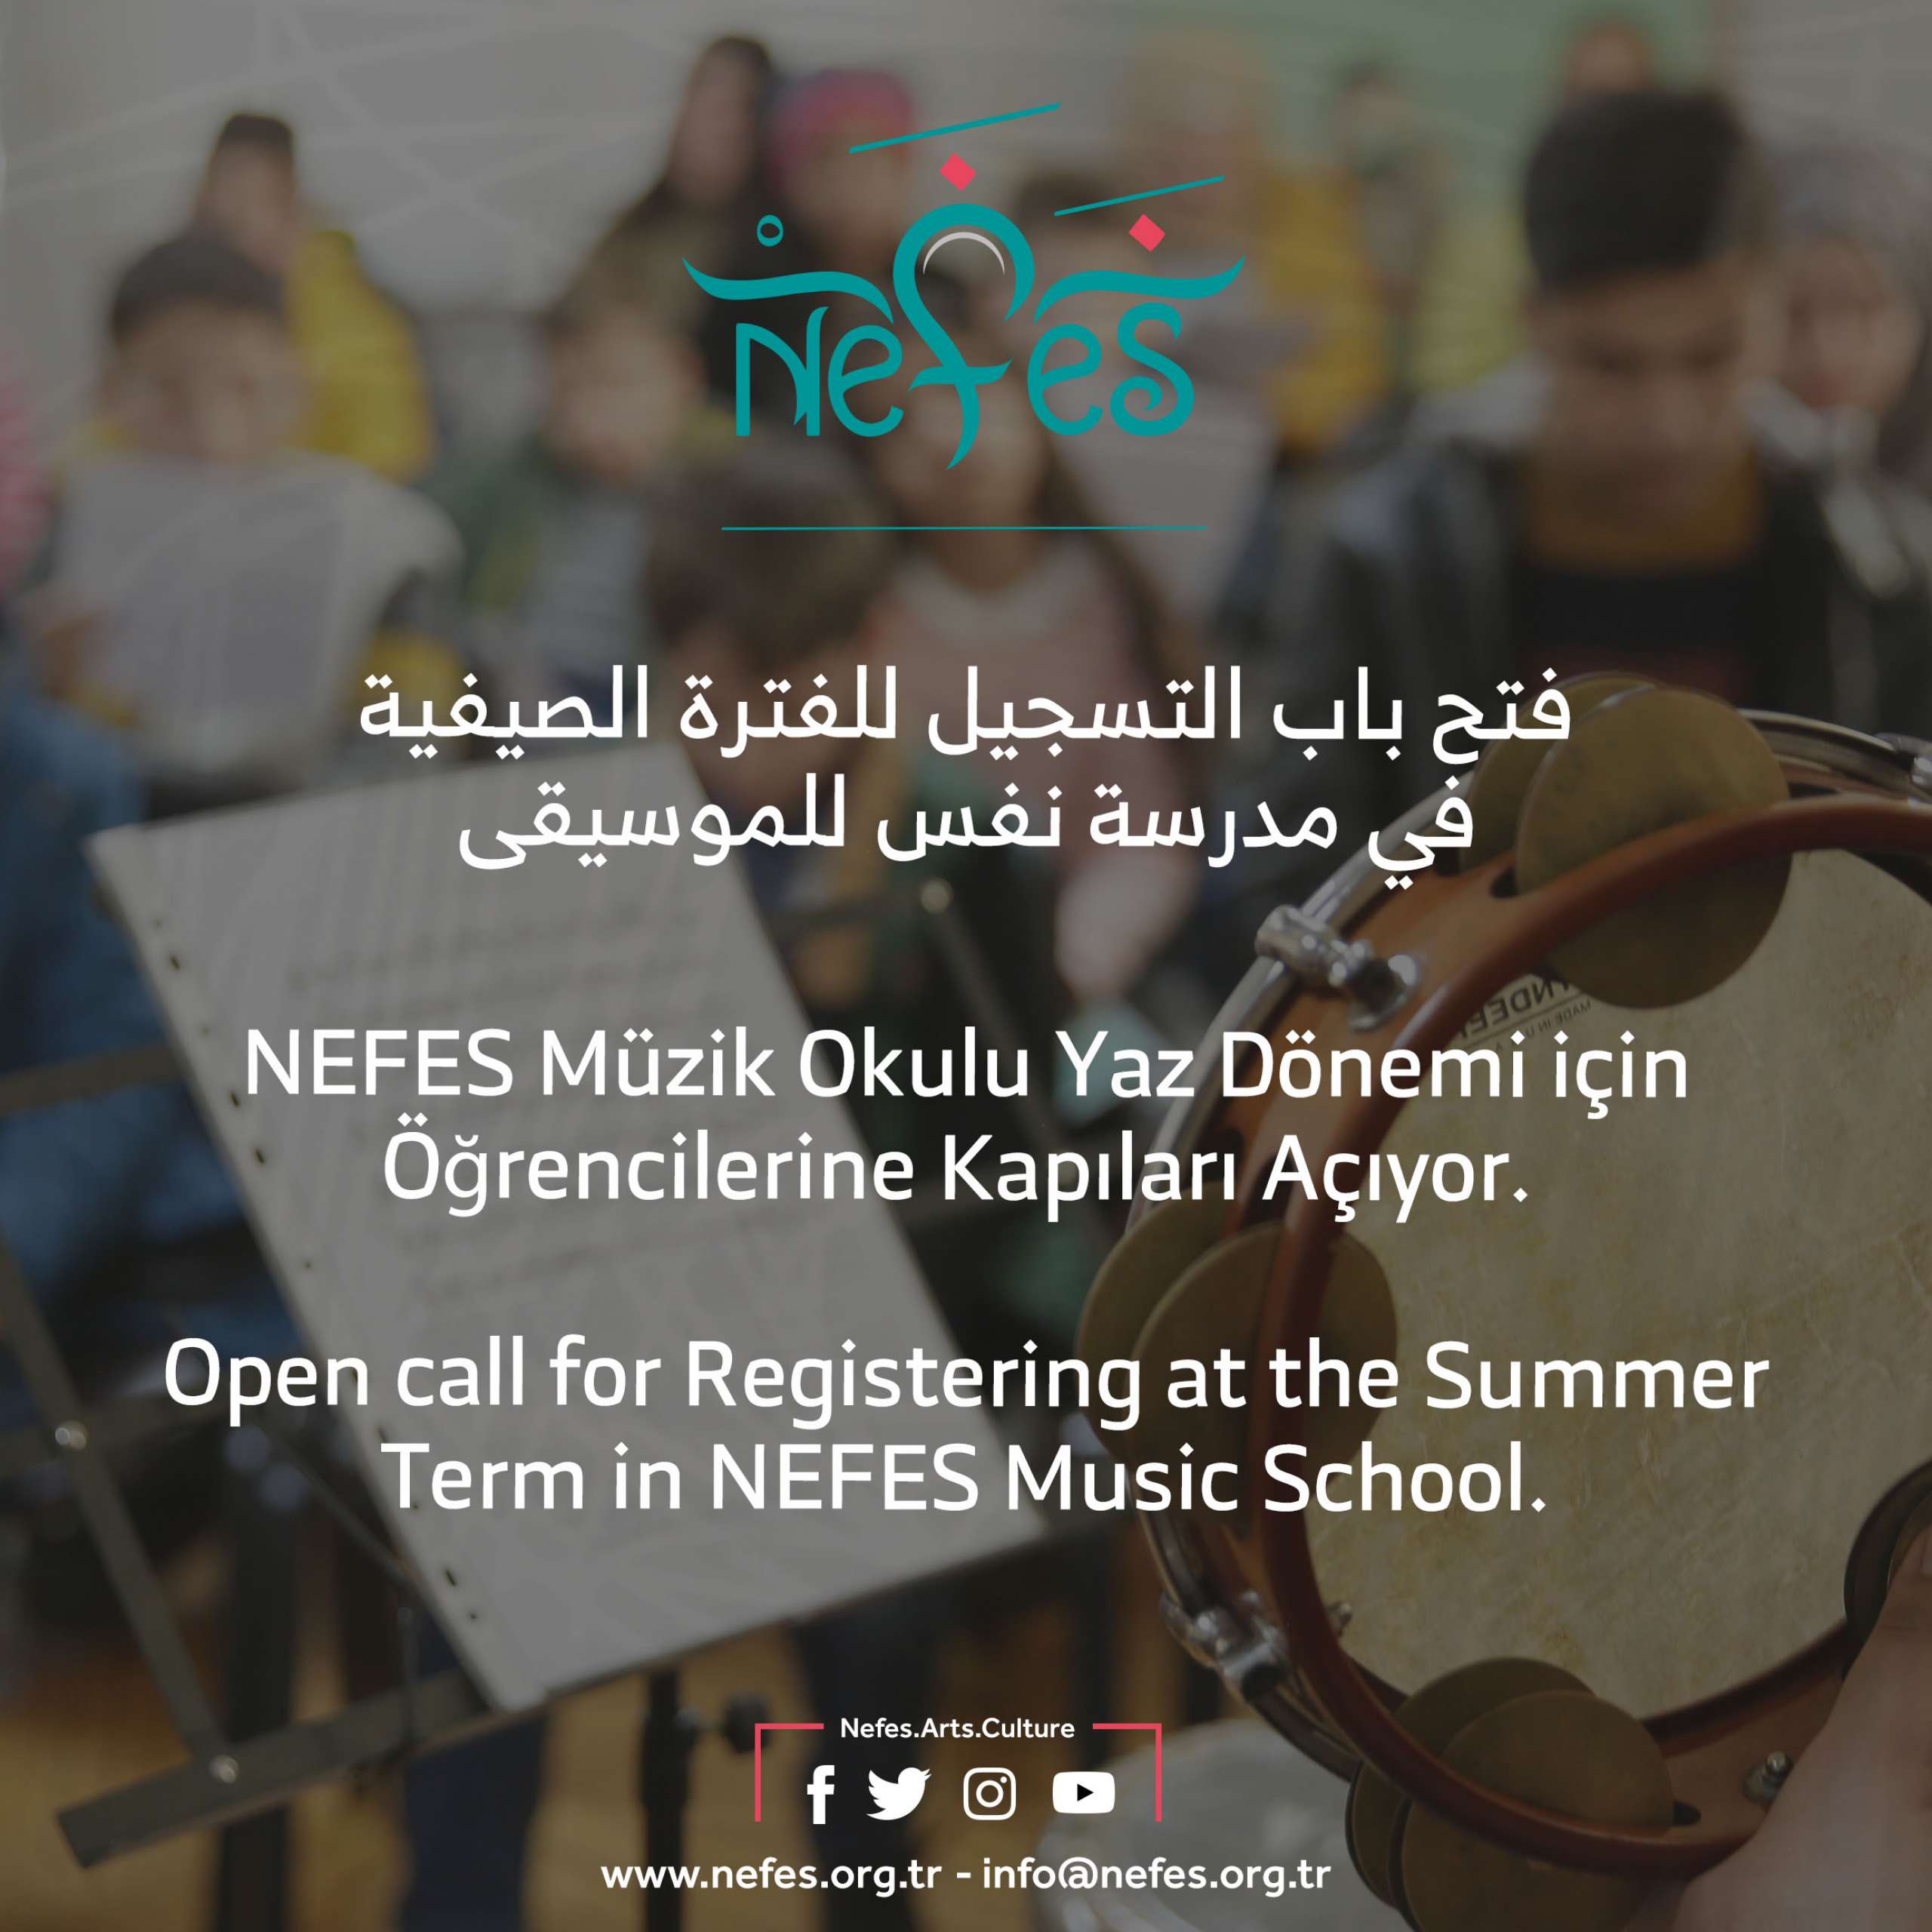 Open call for Registering at the Summer Term in NEFES Music School